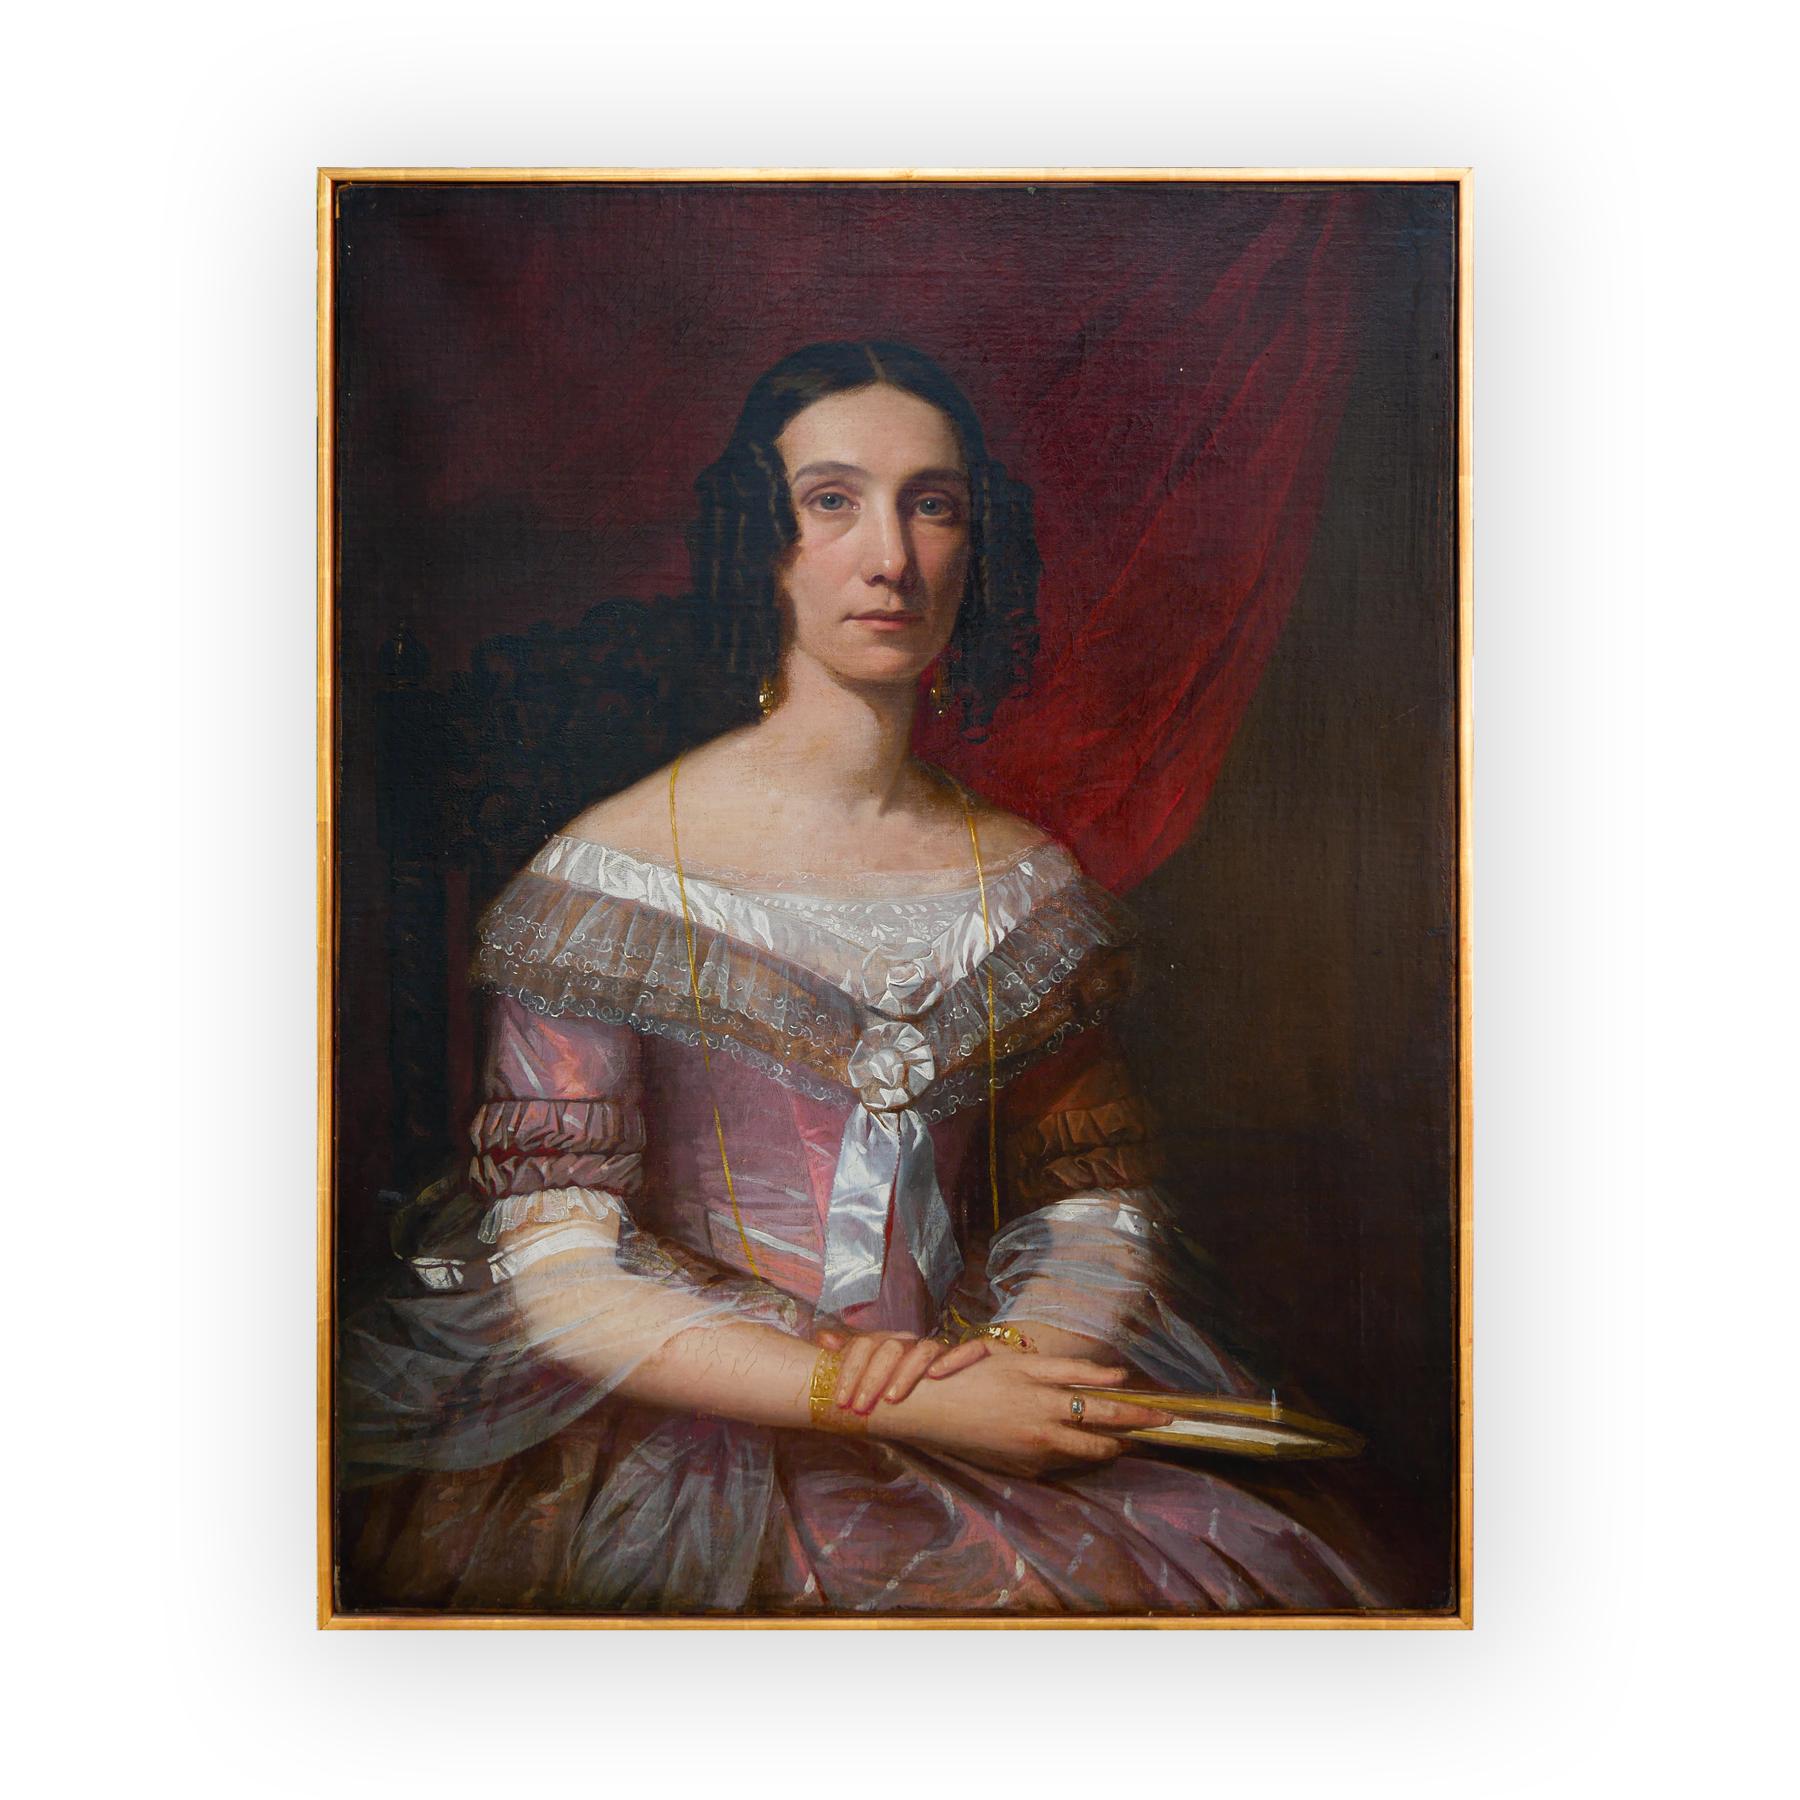 Dark Red and Pink Antique Portrait of a Victorian Lady - Painting by Leonardus Nardus